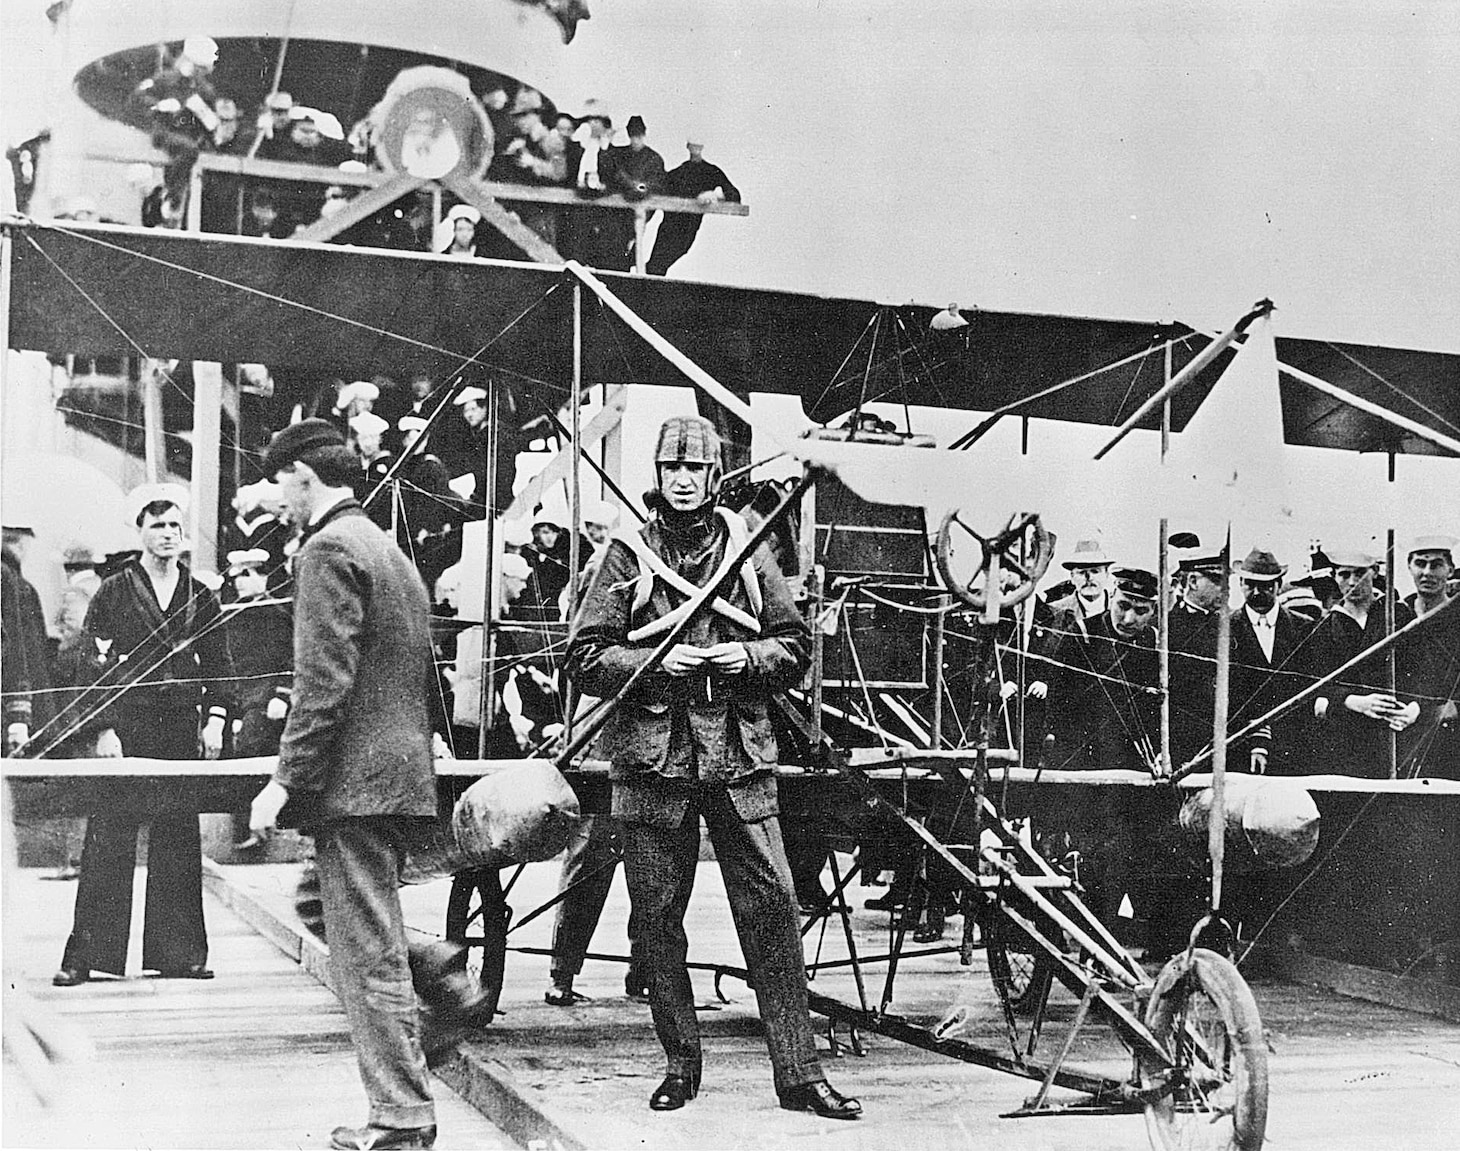 Eugene B. Ely by his Curtiss Model D between landing and takeoff on the armored cruiser USS Pennsylvania (ACR-4/CA-4), January 18, 1911. Note his padded football helmet and improvised personal flotation inner tubes. Note also, the inset photo of a road sign on eastbound Virginia State Highway 60 just outside NAS Norfolk, which I took in 1984. It commemorates Ely’s flight on November 14, 1910, from the cruiser USS Birmingham (CS-2), the first aircraft launch from a ship and his subsequent landing on a nearby beach near Willoughby Spit.